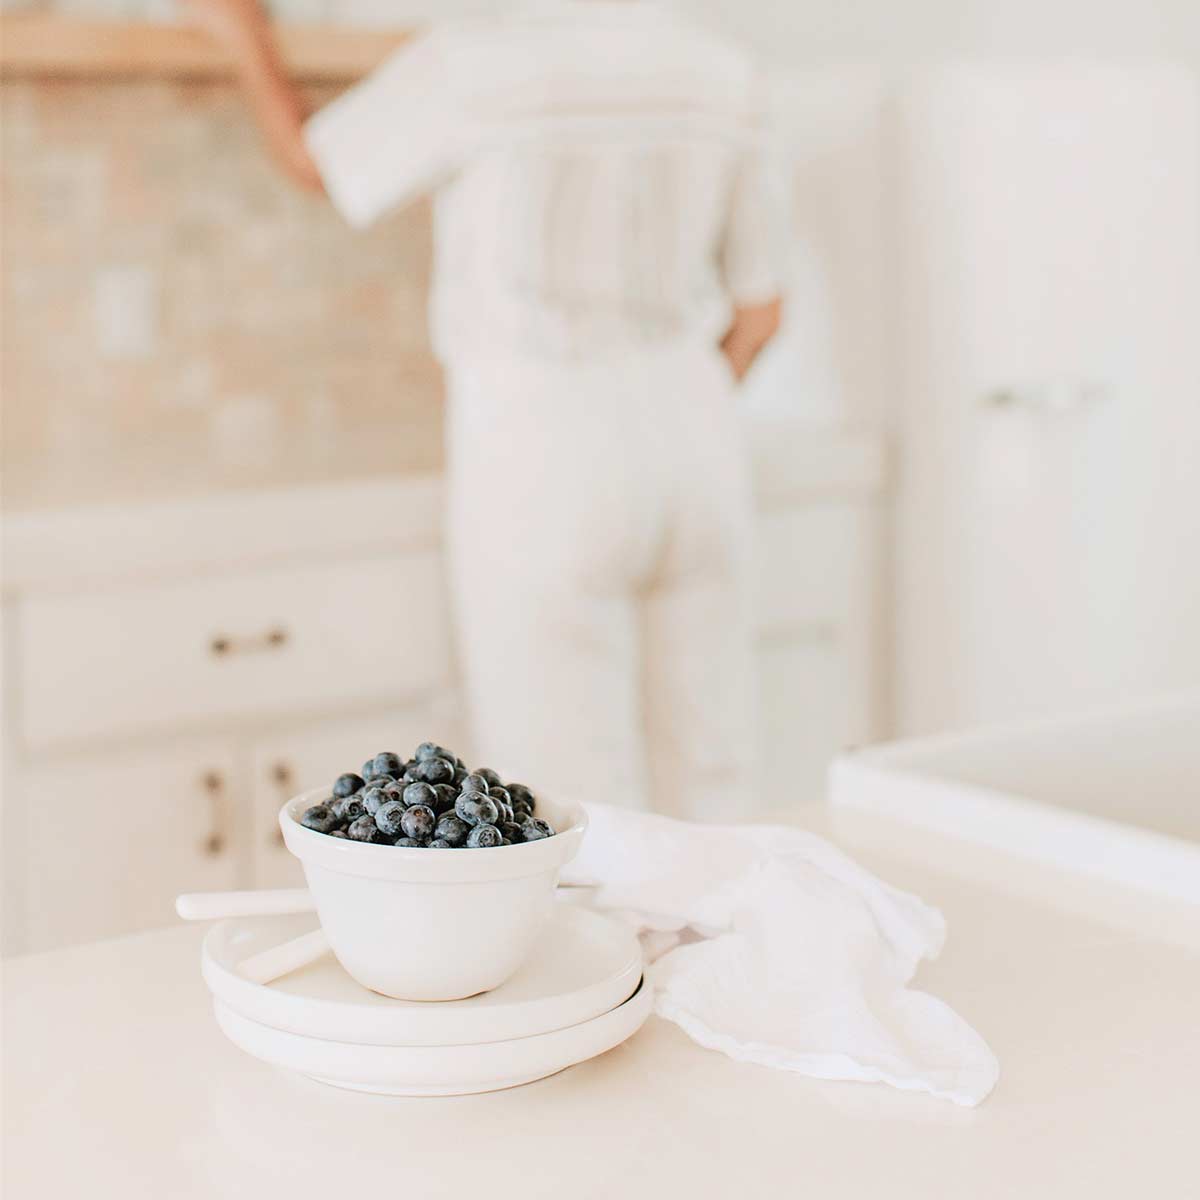 Bowl of blueberries on white dishes in white kitchen with blurred image of woman in background reaching for item on shelf.